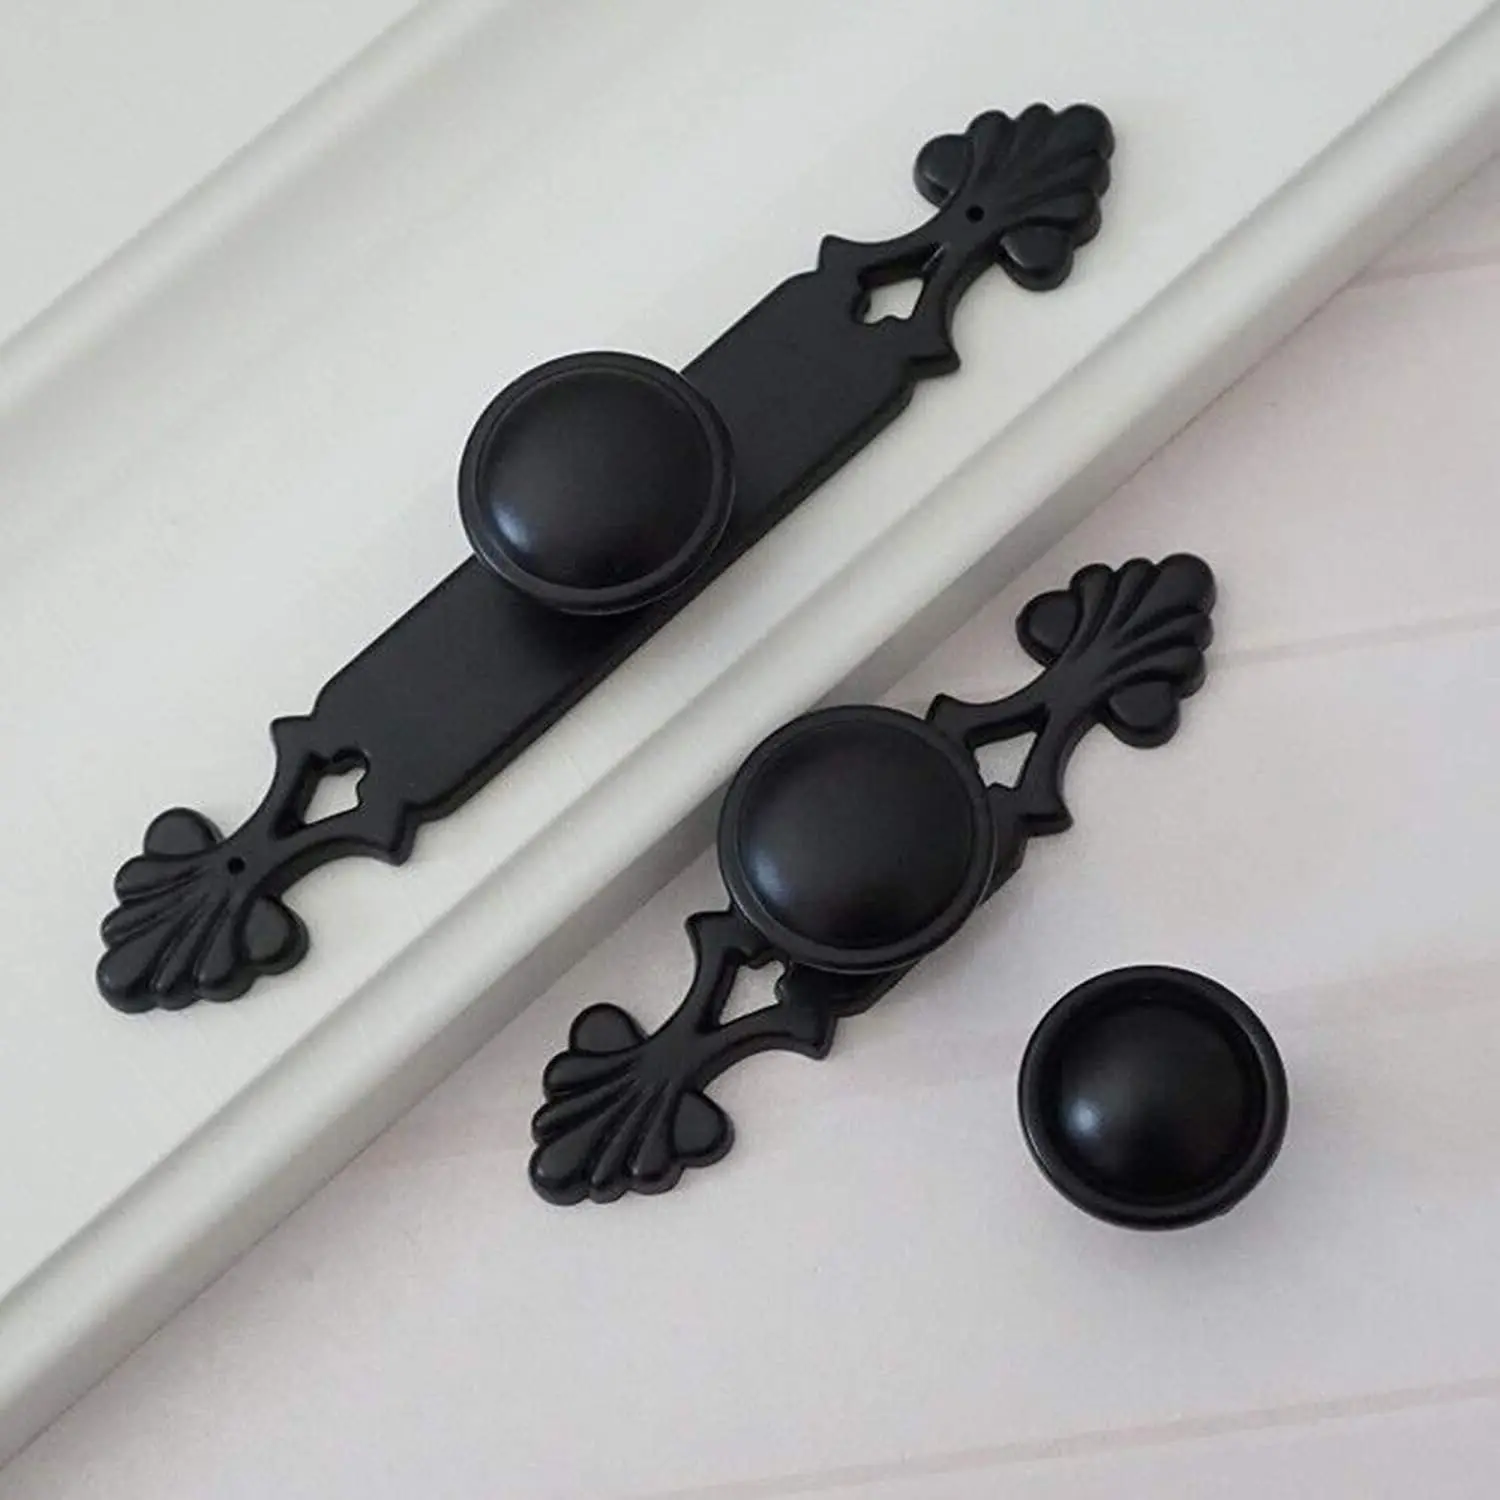 

Black Zinc Allloy Cabinet Knobs Rustic Handles for Cabinets and Drawers Back Plate Furniture Handle Wardrobe Closet Pulls Knob